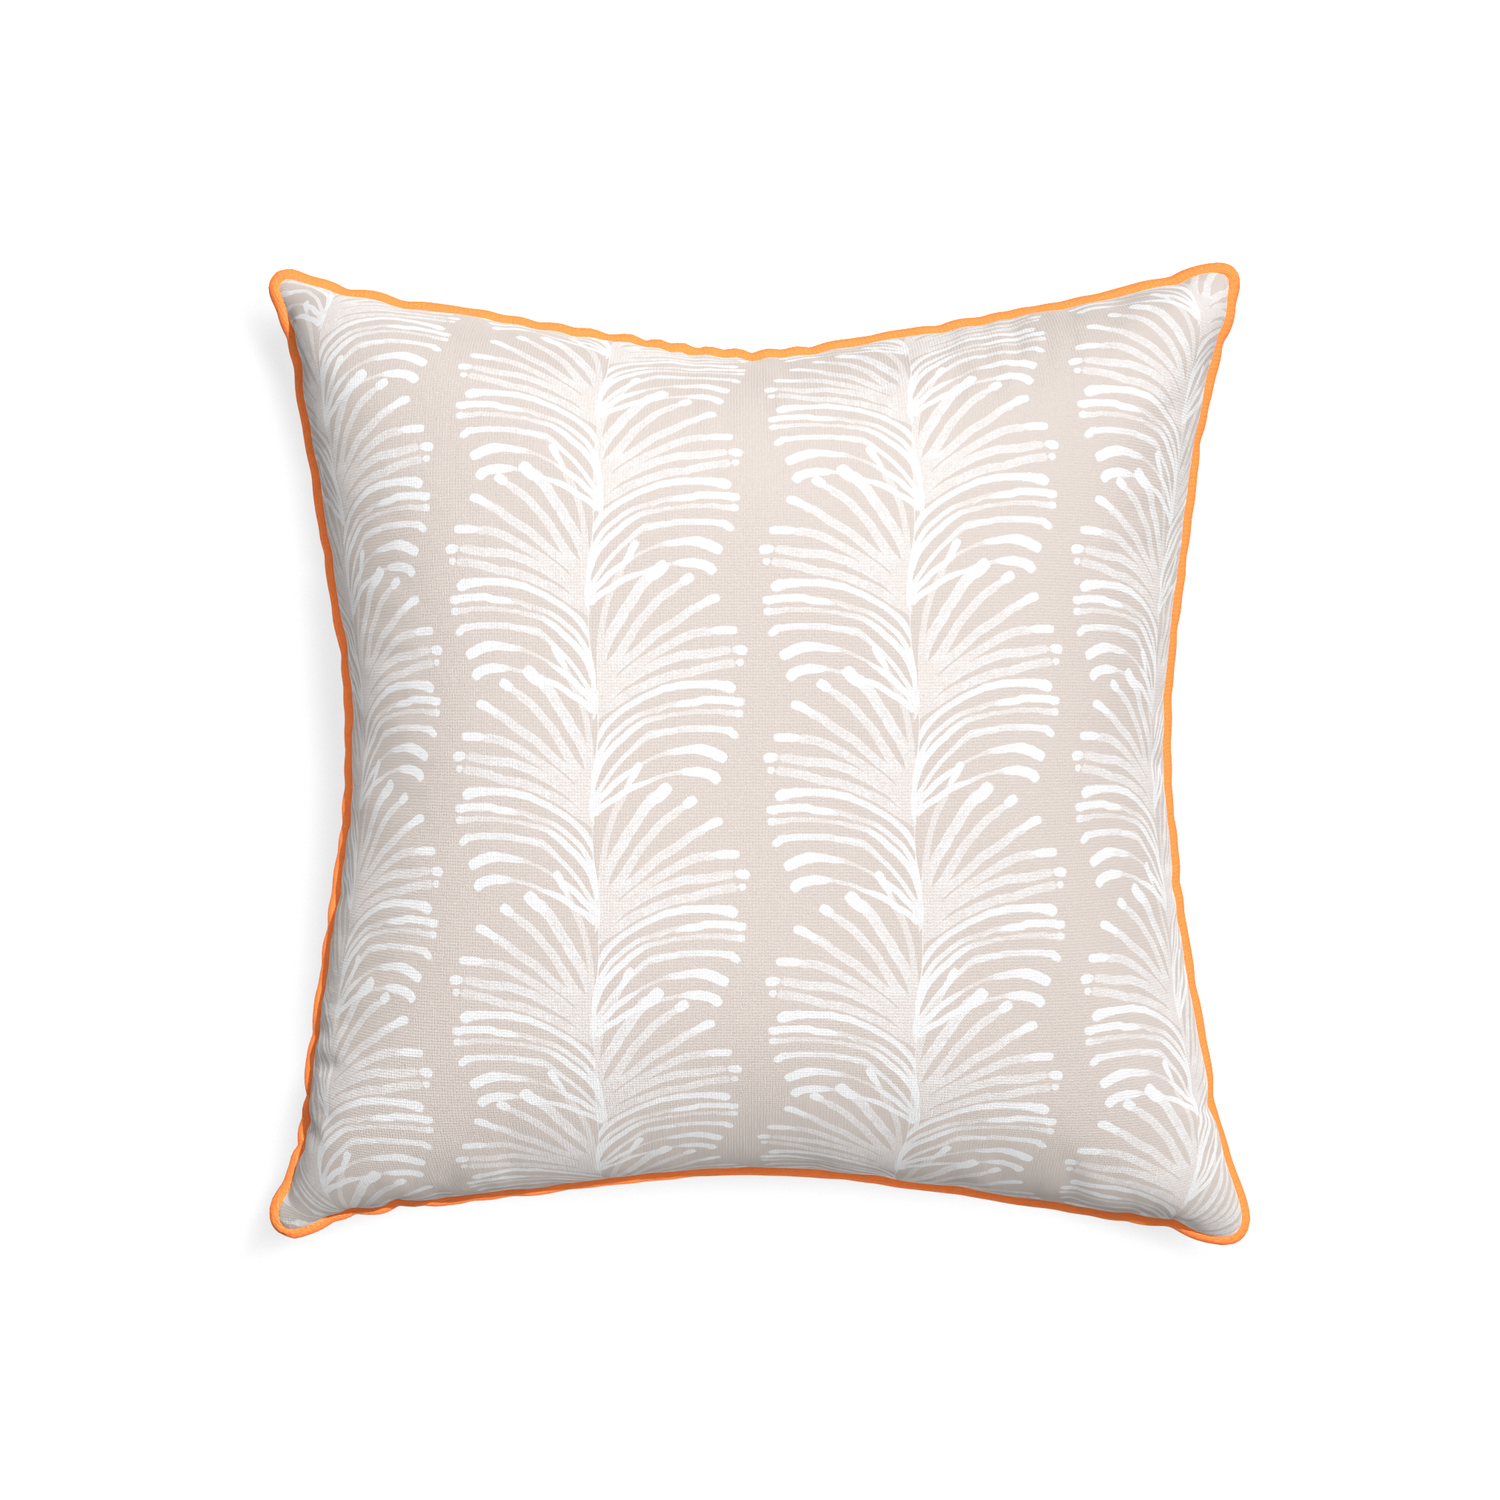 22-square emma sand custom sand colored botanical stripepillow with clementine piping on white background